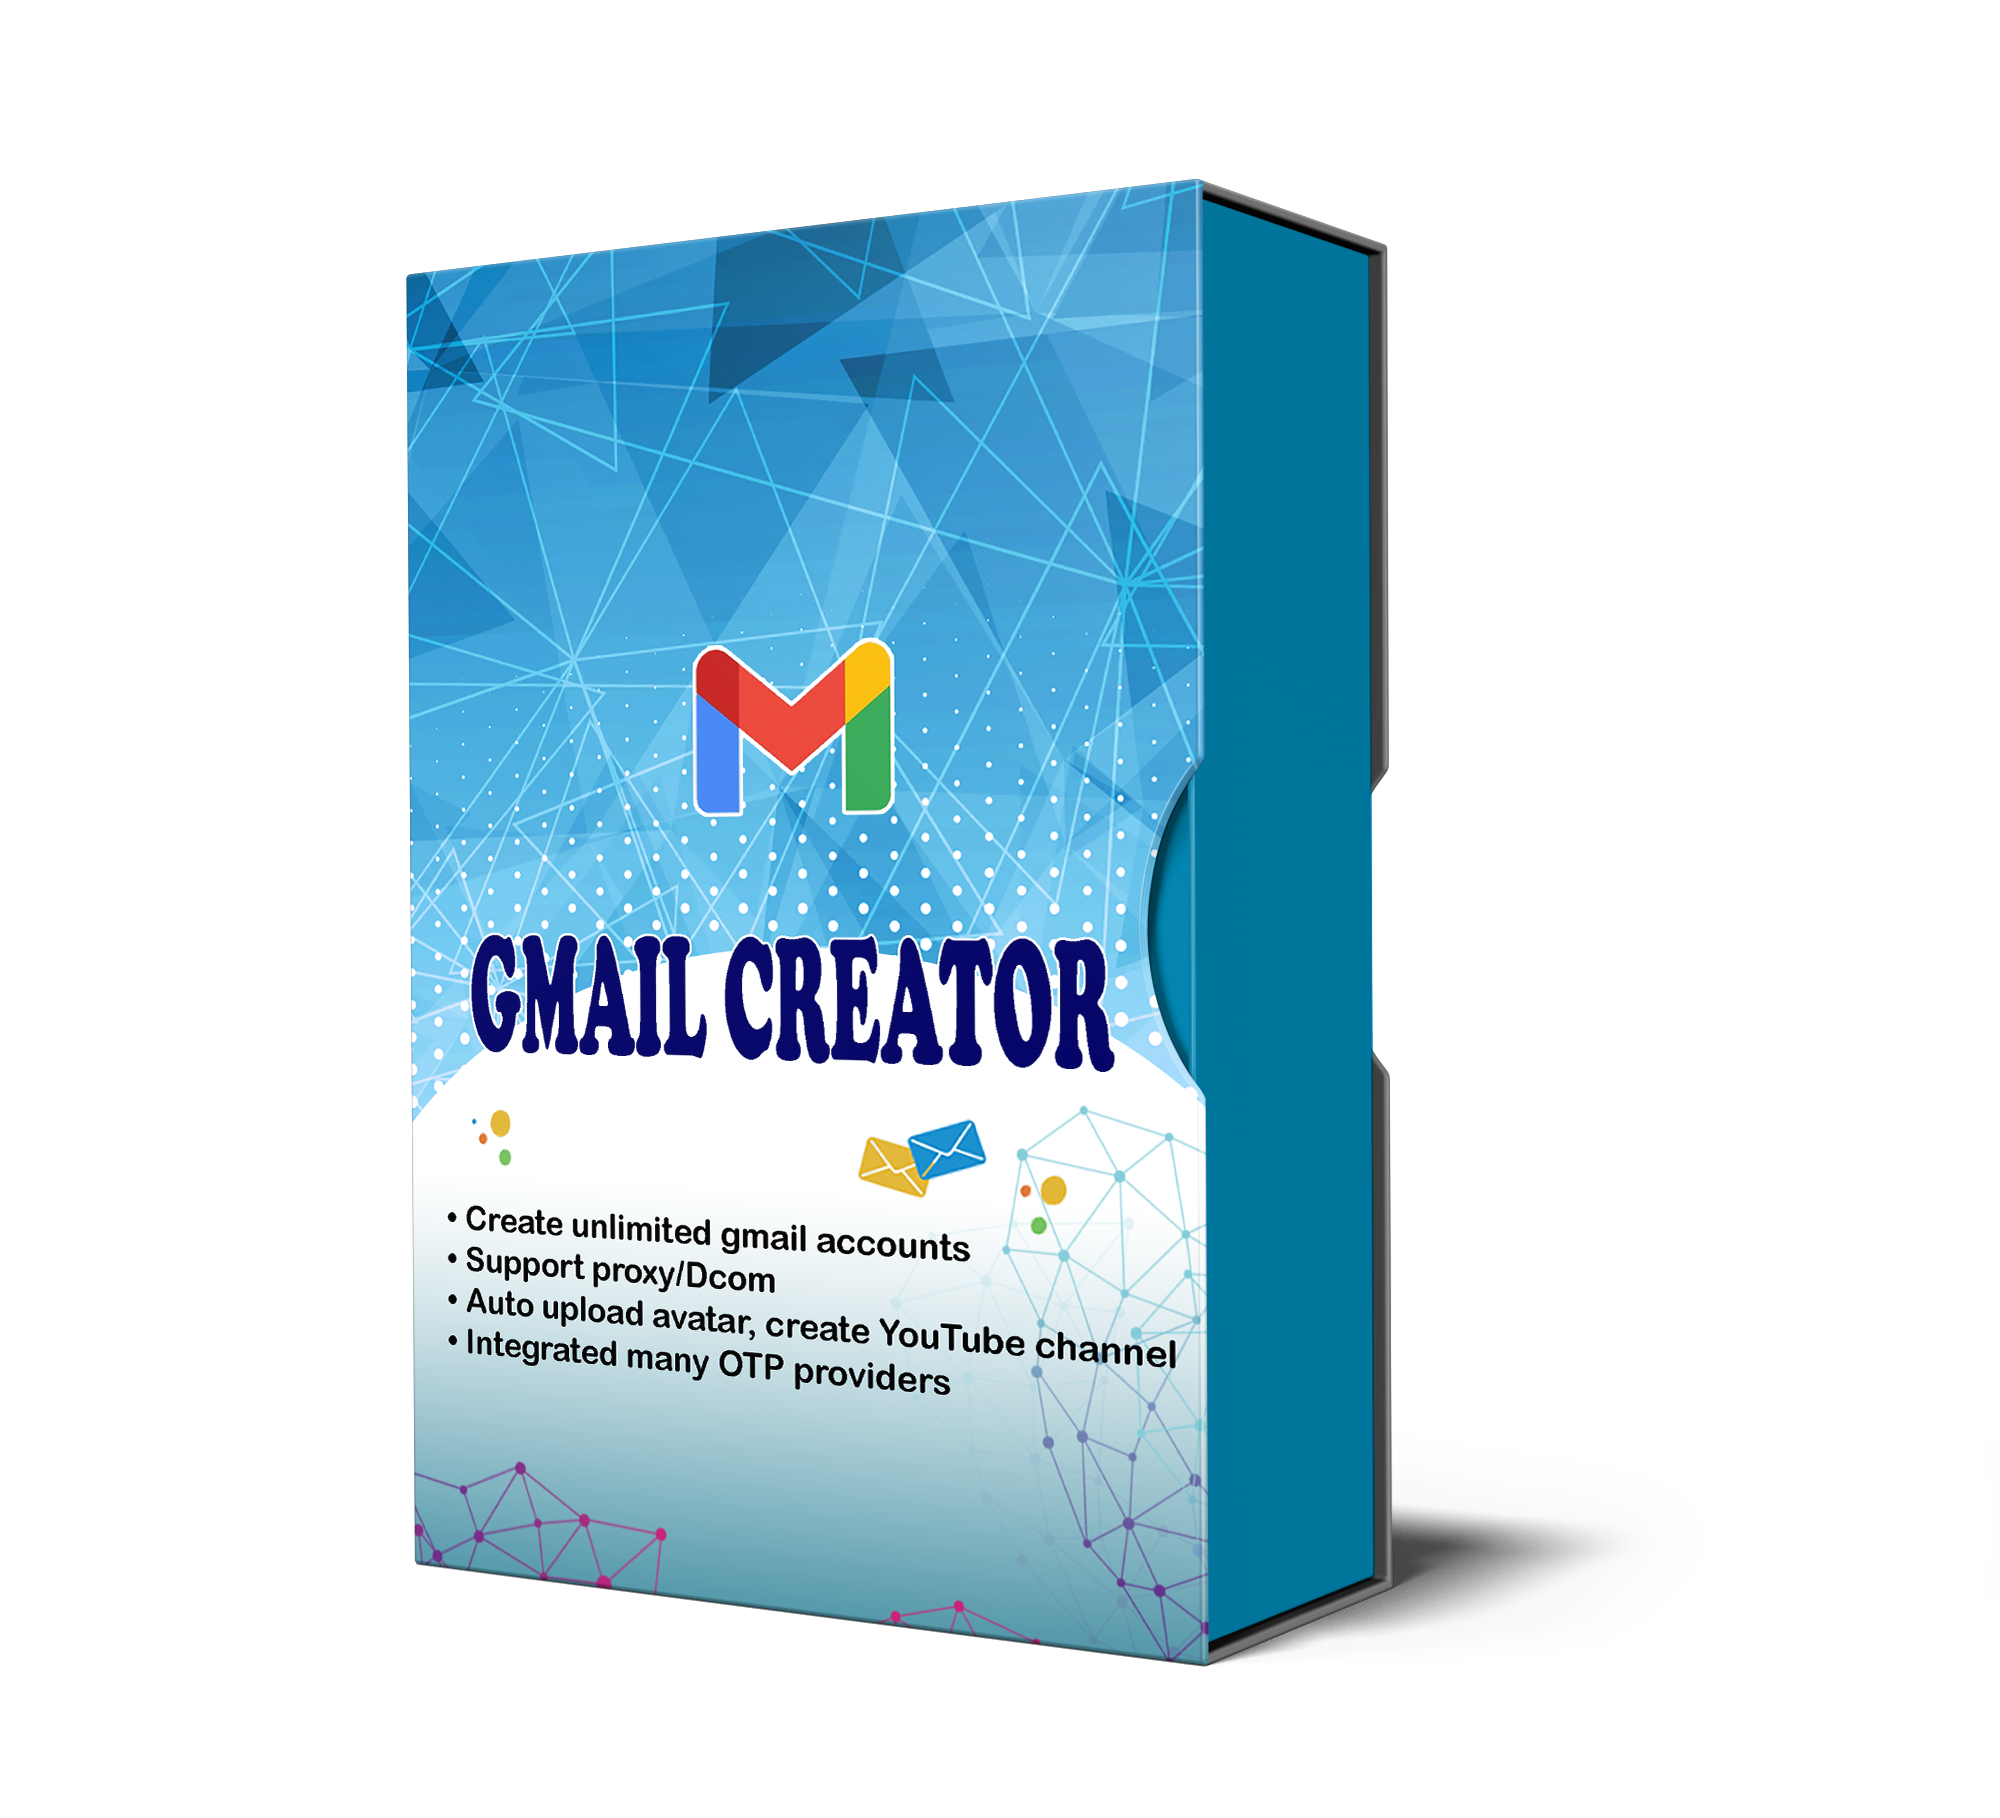 Bulk gmail account creator – Create unlimited gmail accounts with low cost